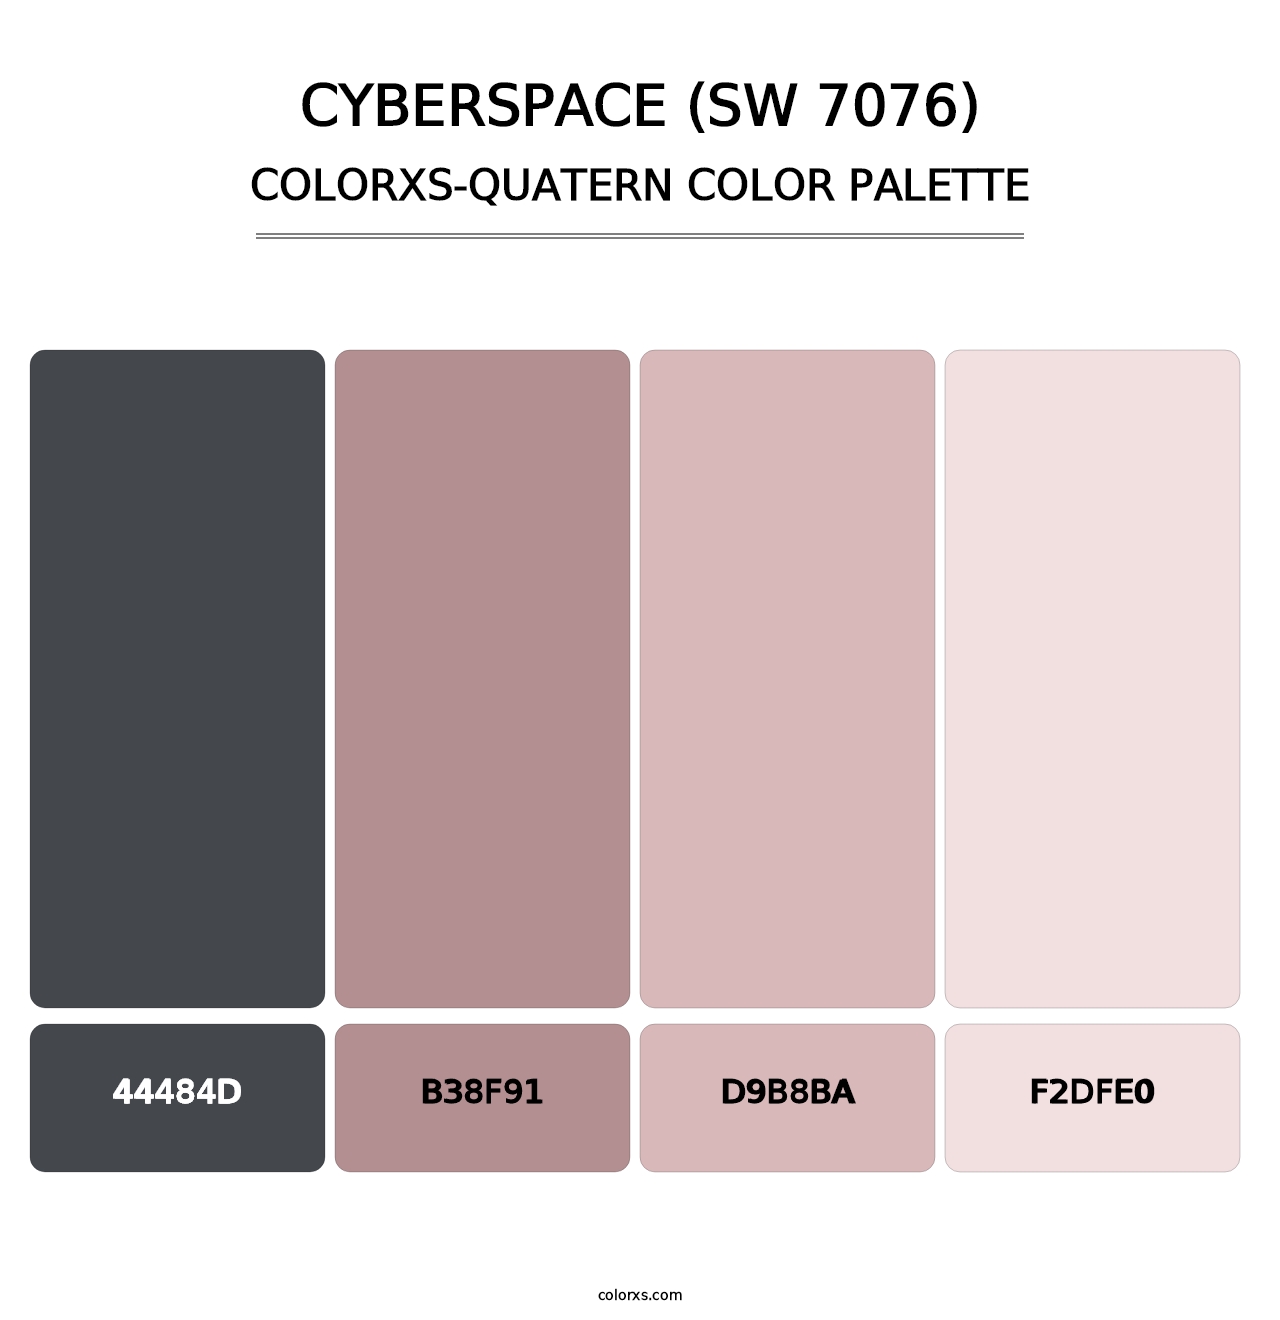 Cyberspace (SW 7076) - Colorxs Quatern Palette